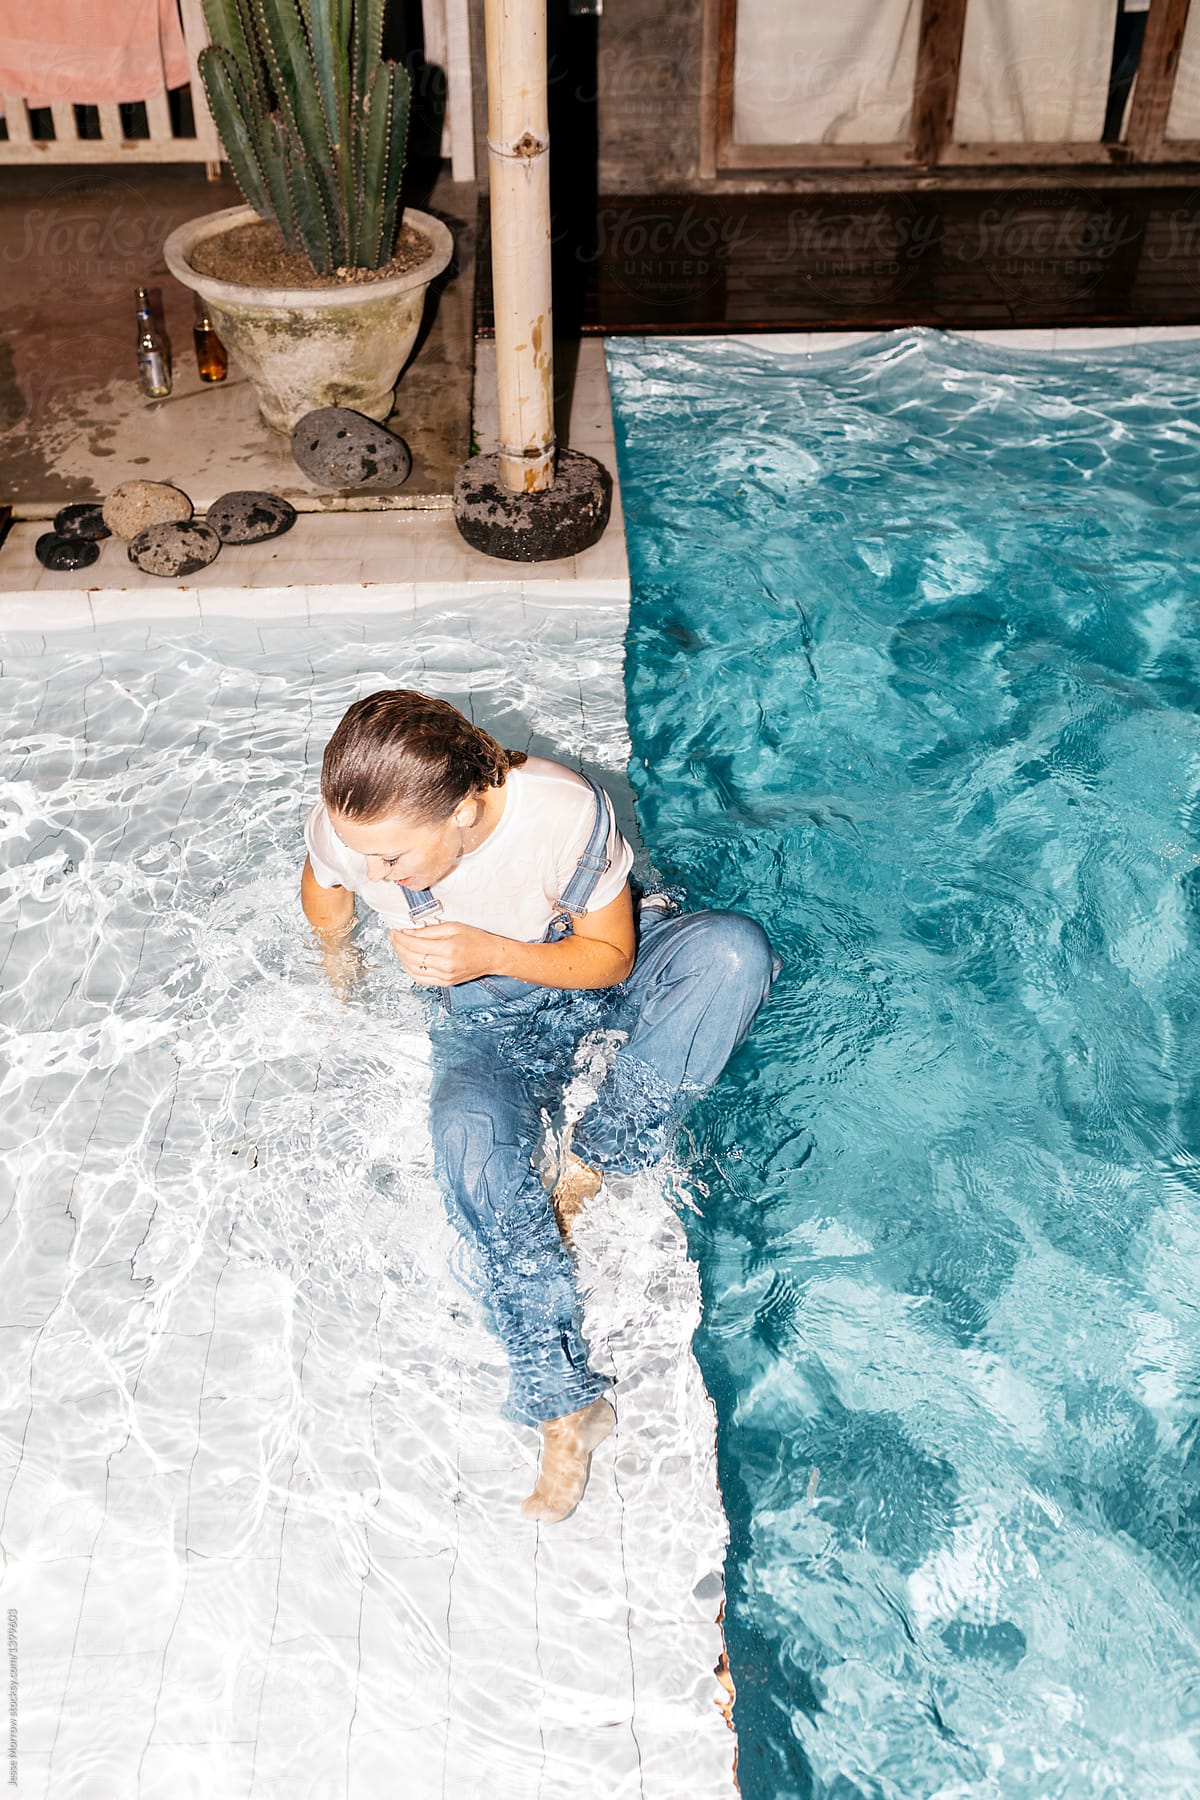 Young Woman Wearing All Her Clothes While Swimming In Pool During Night 876